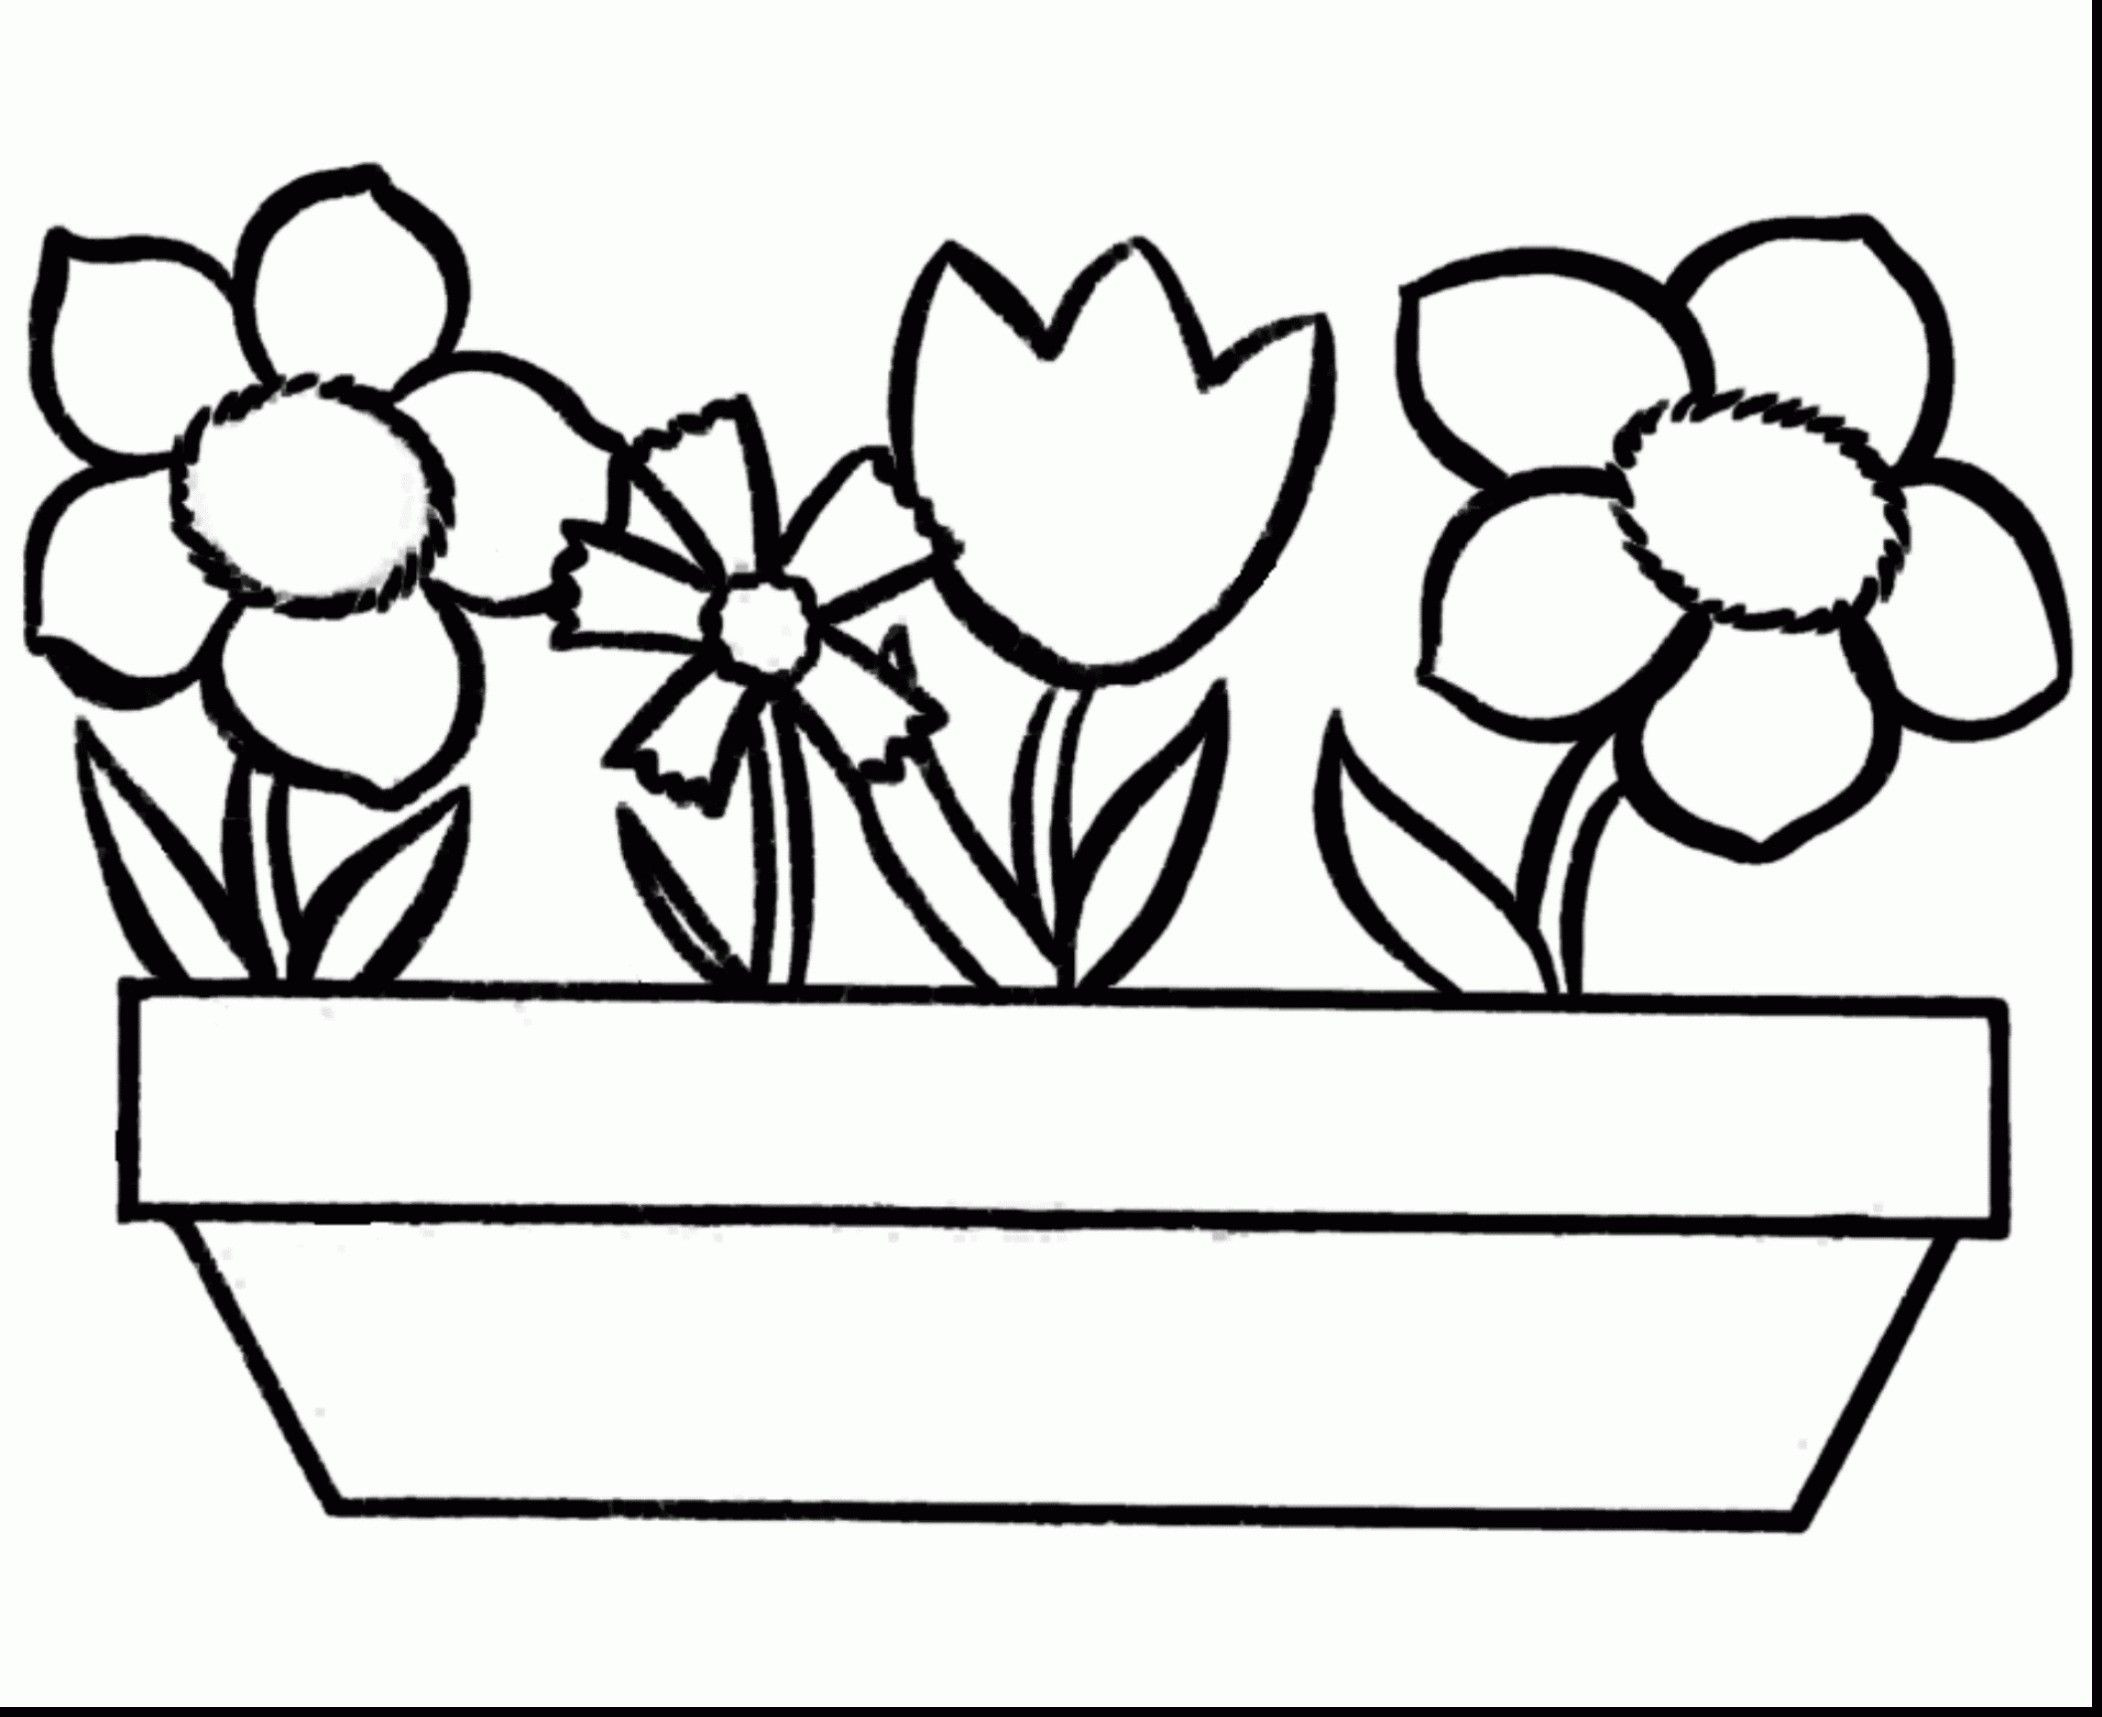 15 Stylish White Tulips In Glass Vase 2024 free download white tulips in glass vase of tulip bulb vase fresh coloring pages roses vases flower vase throughout tulip bulb vase fresh coloring pages roses vases flower vase coloring page pages